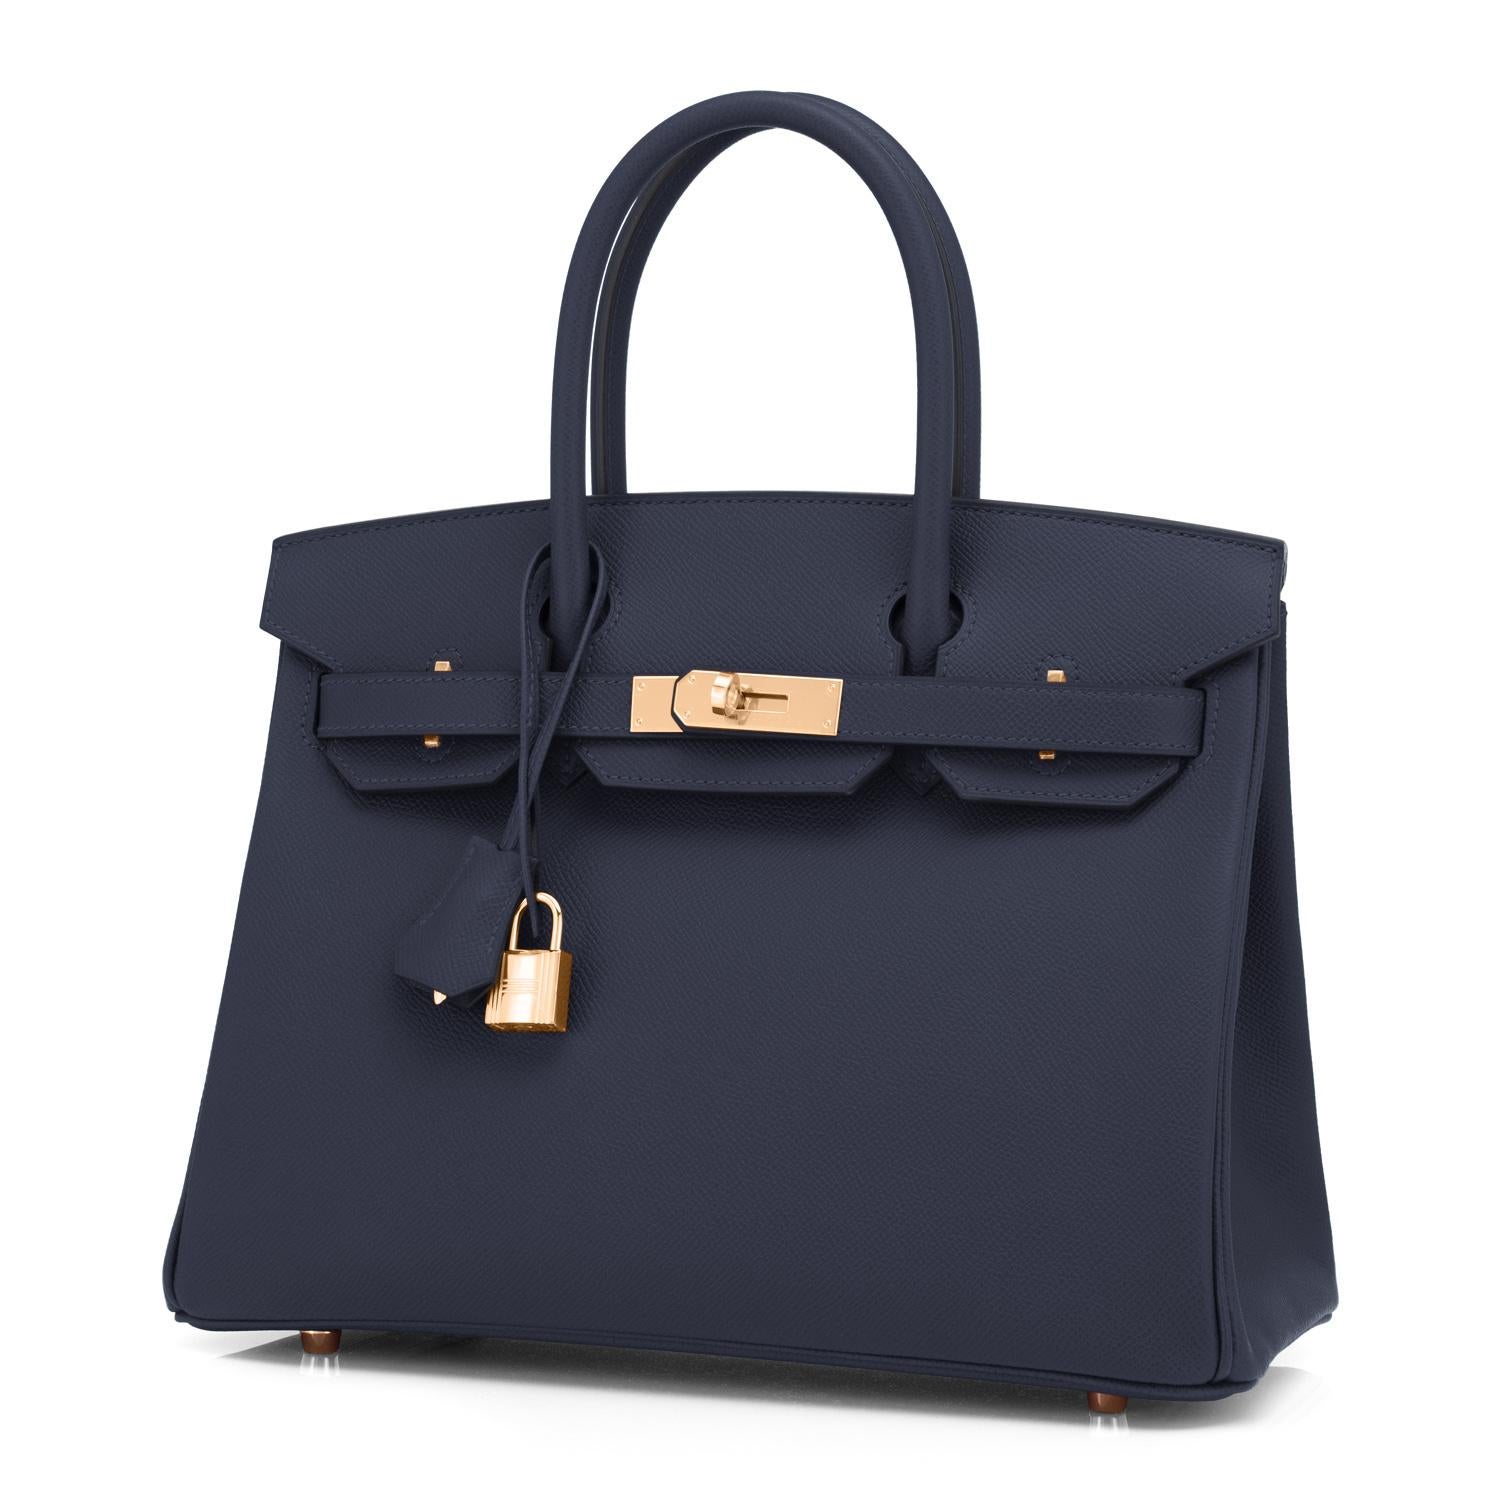 Hermes Indigo Rose Gold Deep Navy Blue Birkin 30cm Bag Z Stamp, 2021
Truly one of the prettiest, most elegant combinations we have ever seen!
Brand New in Box.  Store Fresh.  Pristine Condition (with plastic on hardware).
Just purchased from Hermes